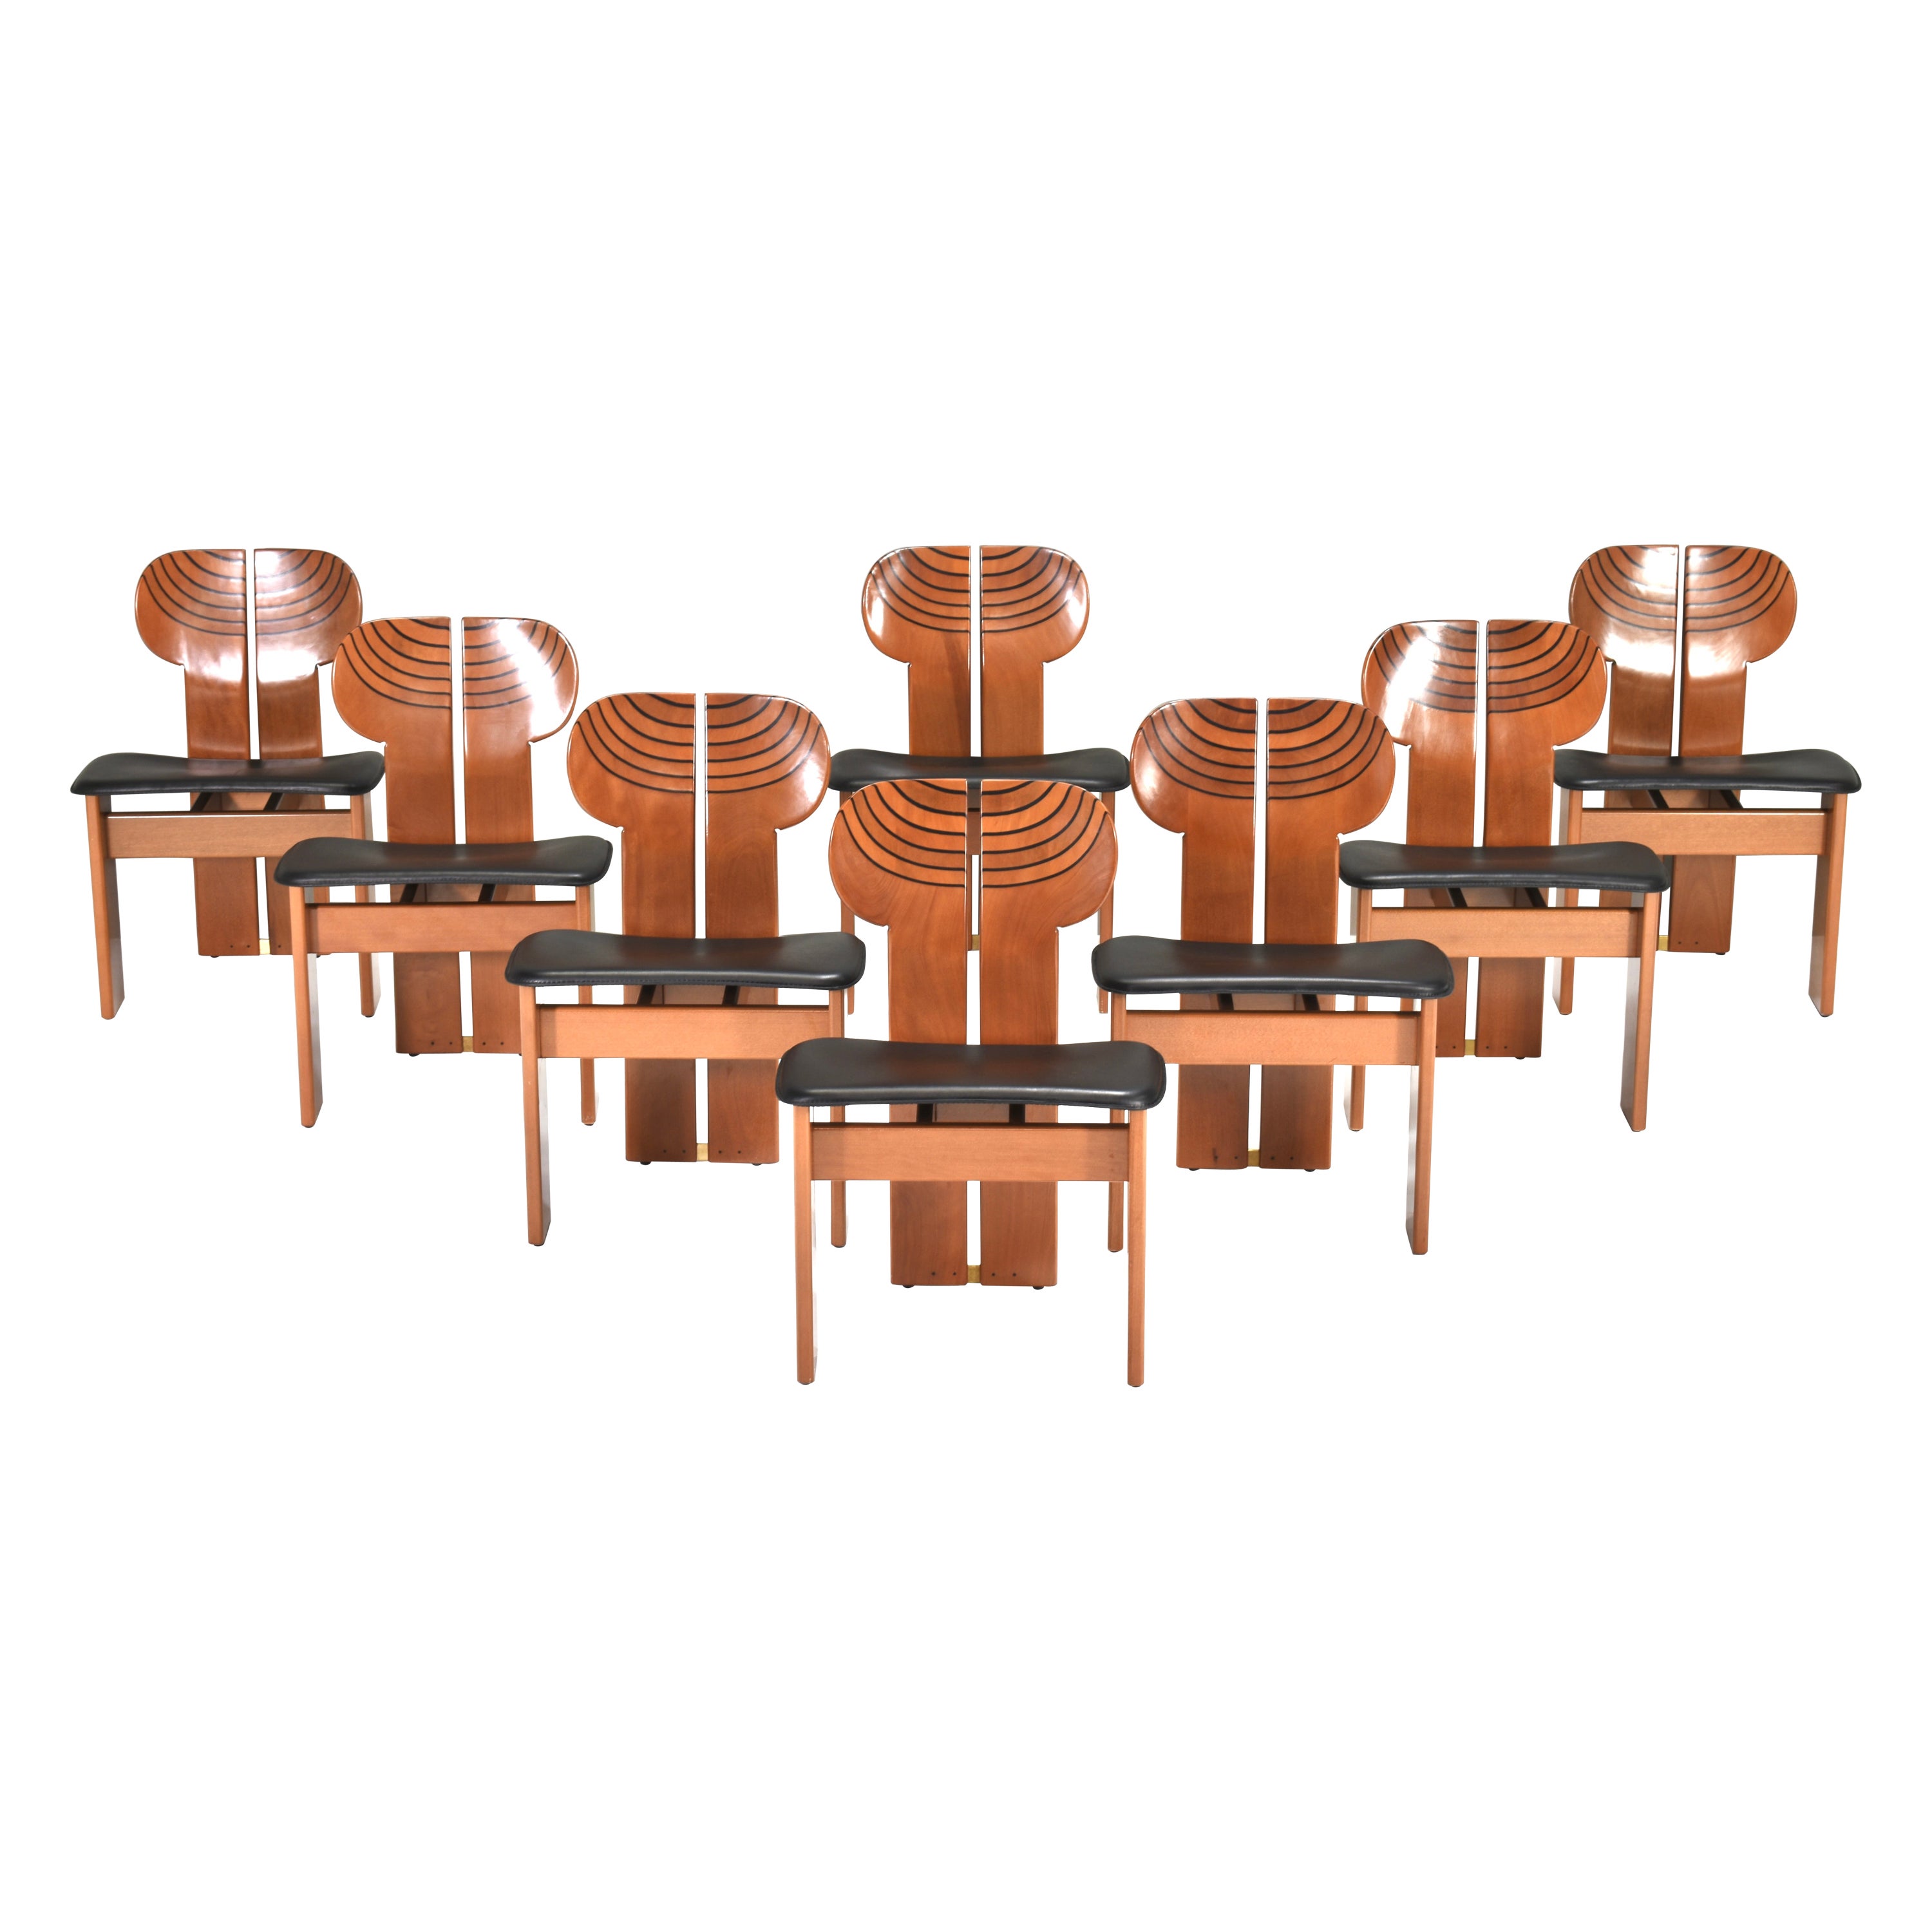 Africa Chairs by Afra & Tobia Scarpa for Maxalto, Italy - 1975, set of 8 